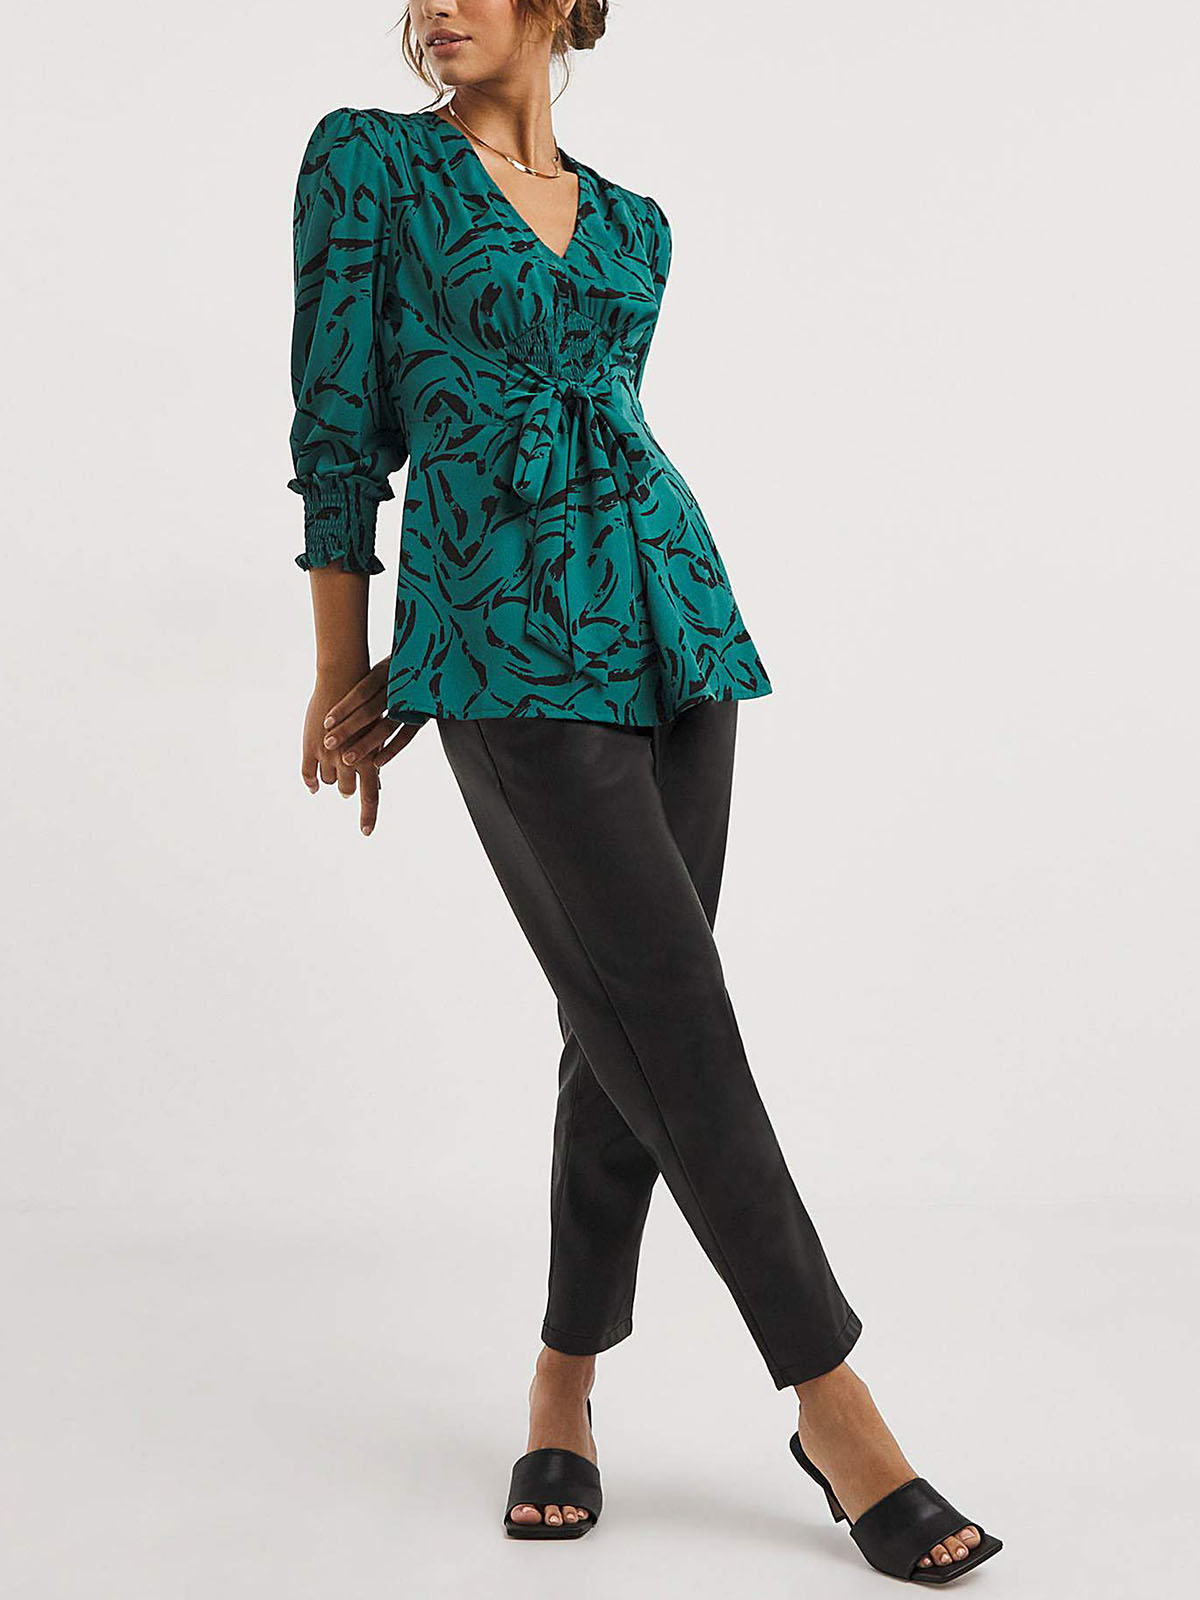 JD Williams - - GREEN Tie Front V-Neck Blouse - Size 10 to 32